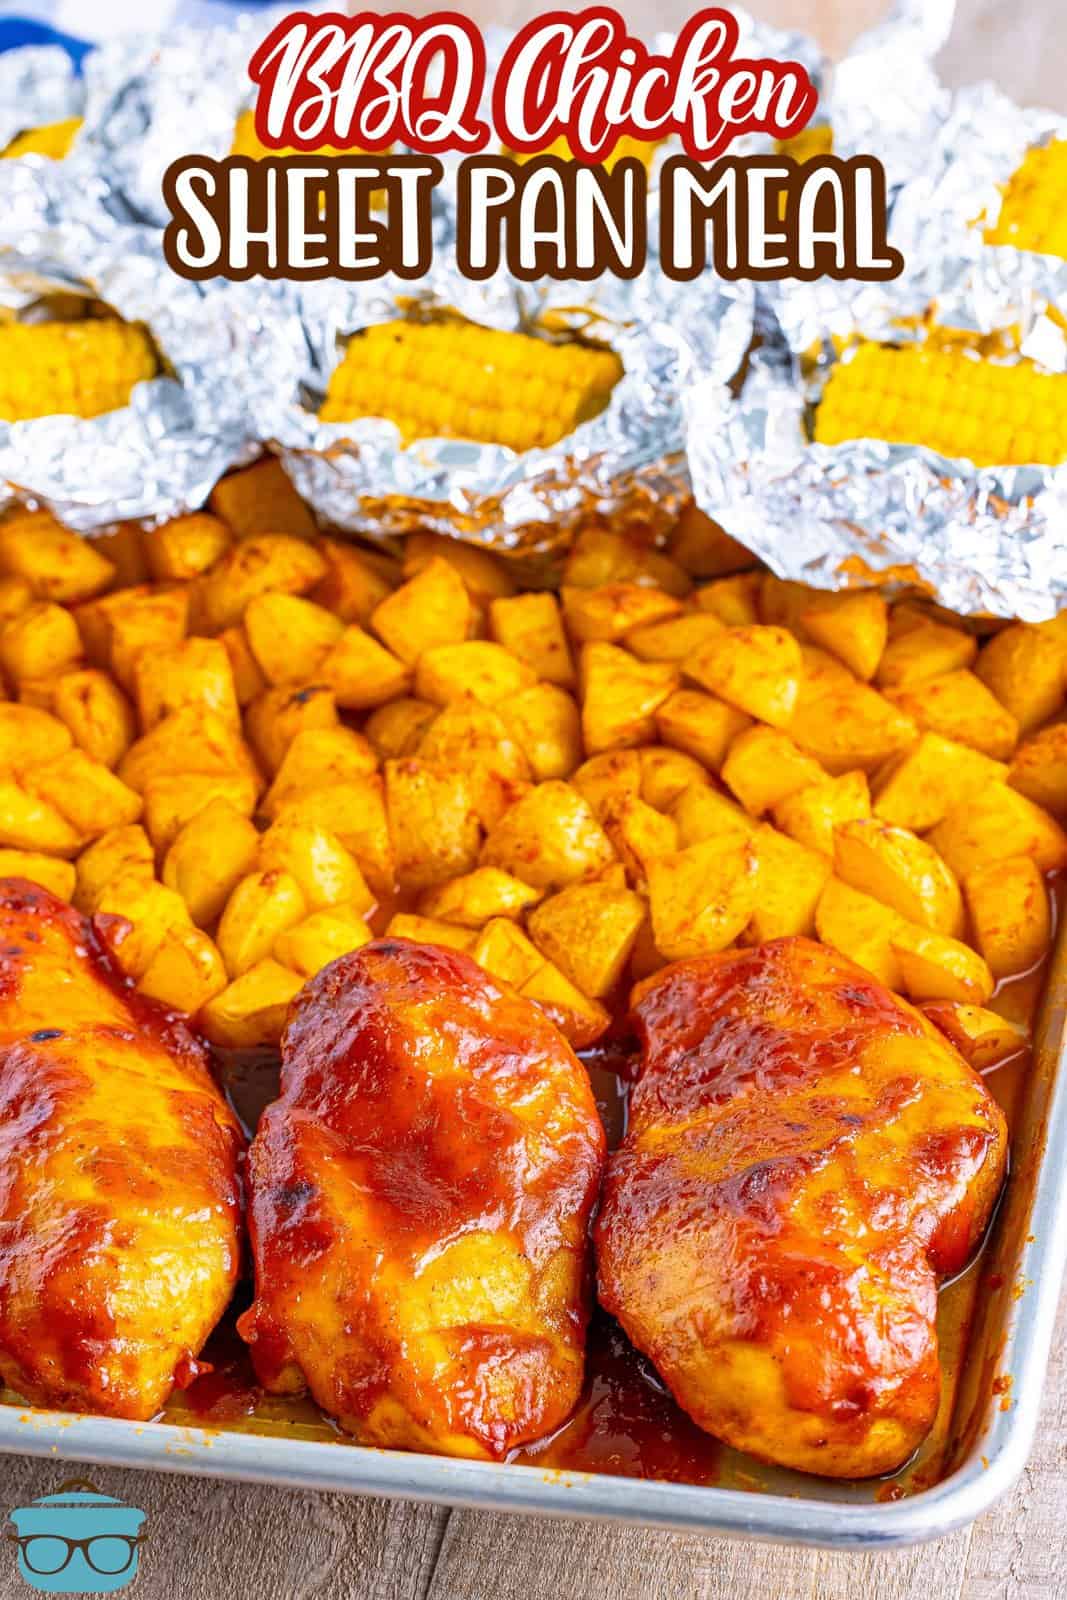 Corn on the cob in aluminum foil, a section of potatoes, and some BBQ chicken.